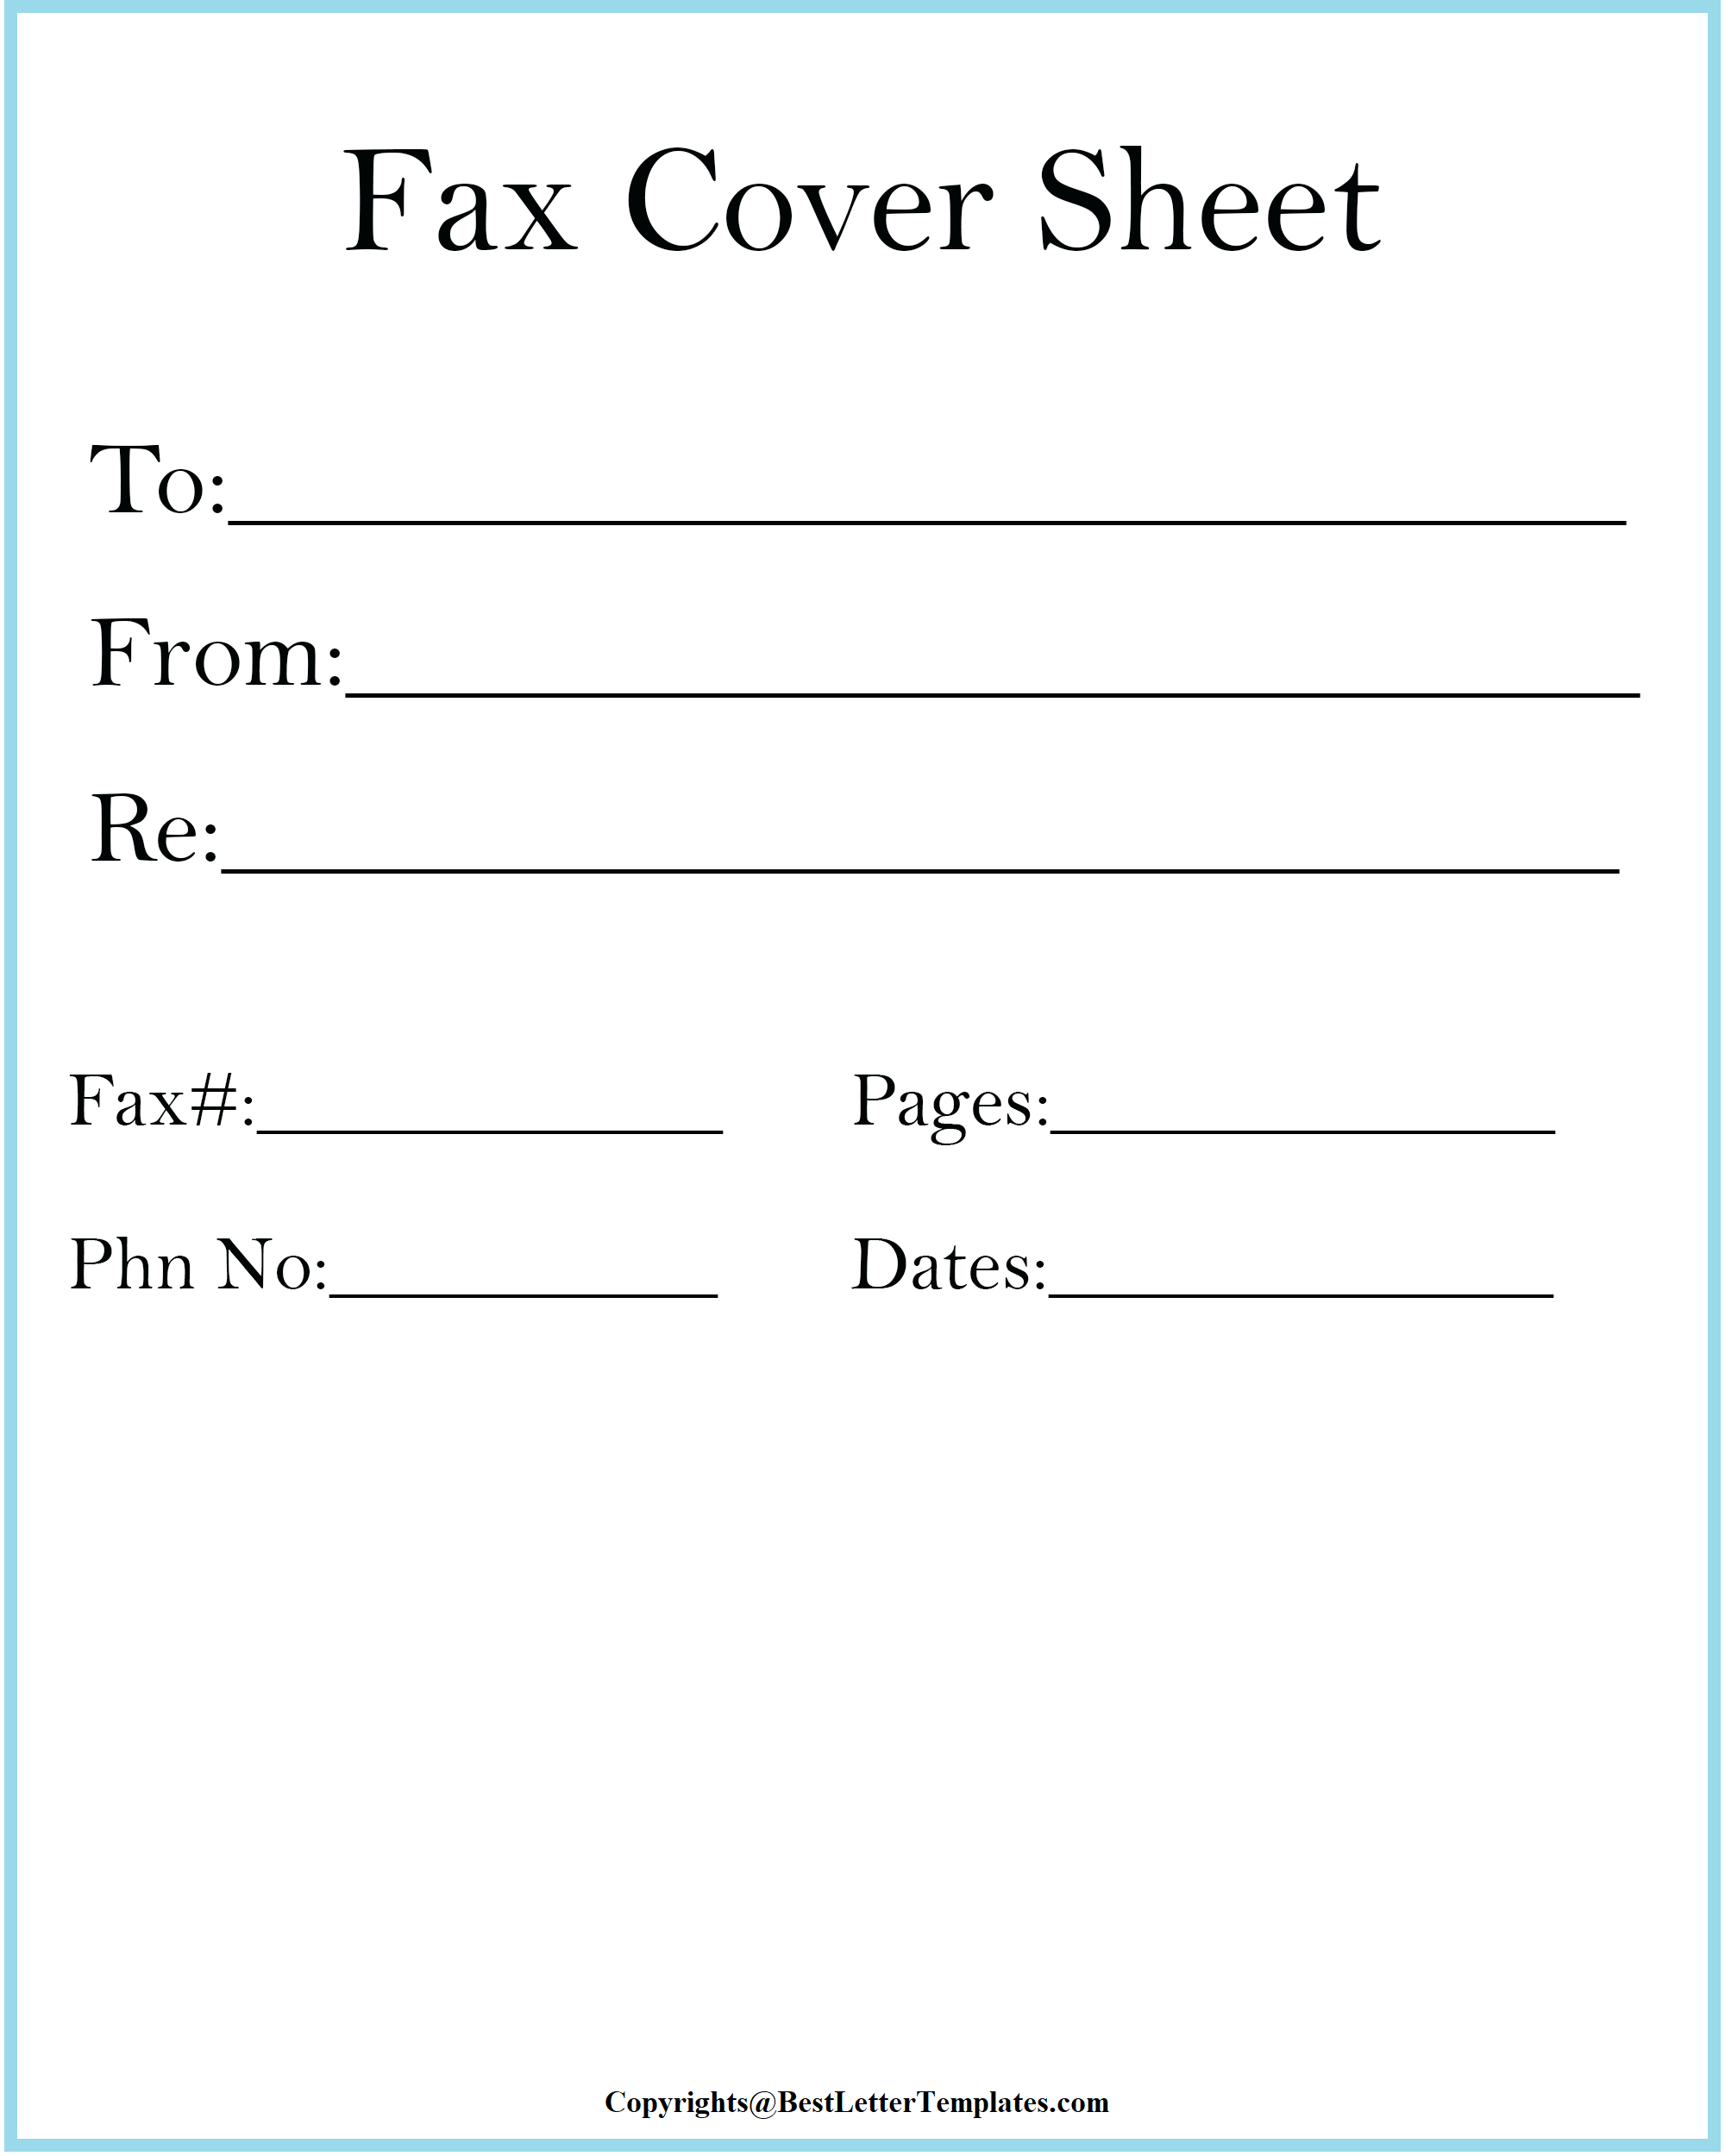 Generic Fax Cover Sheet Template